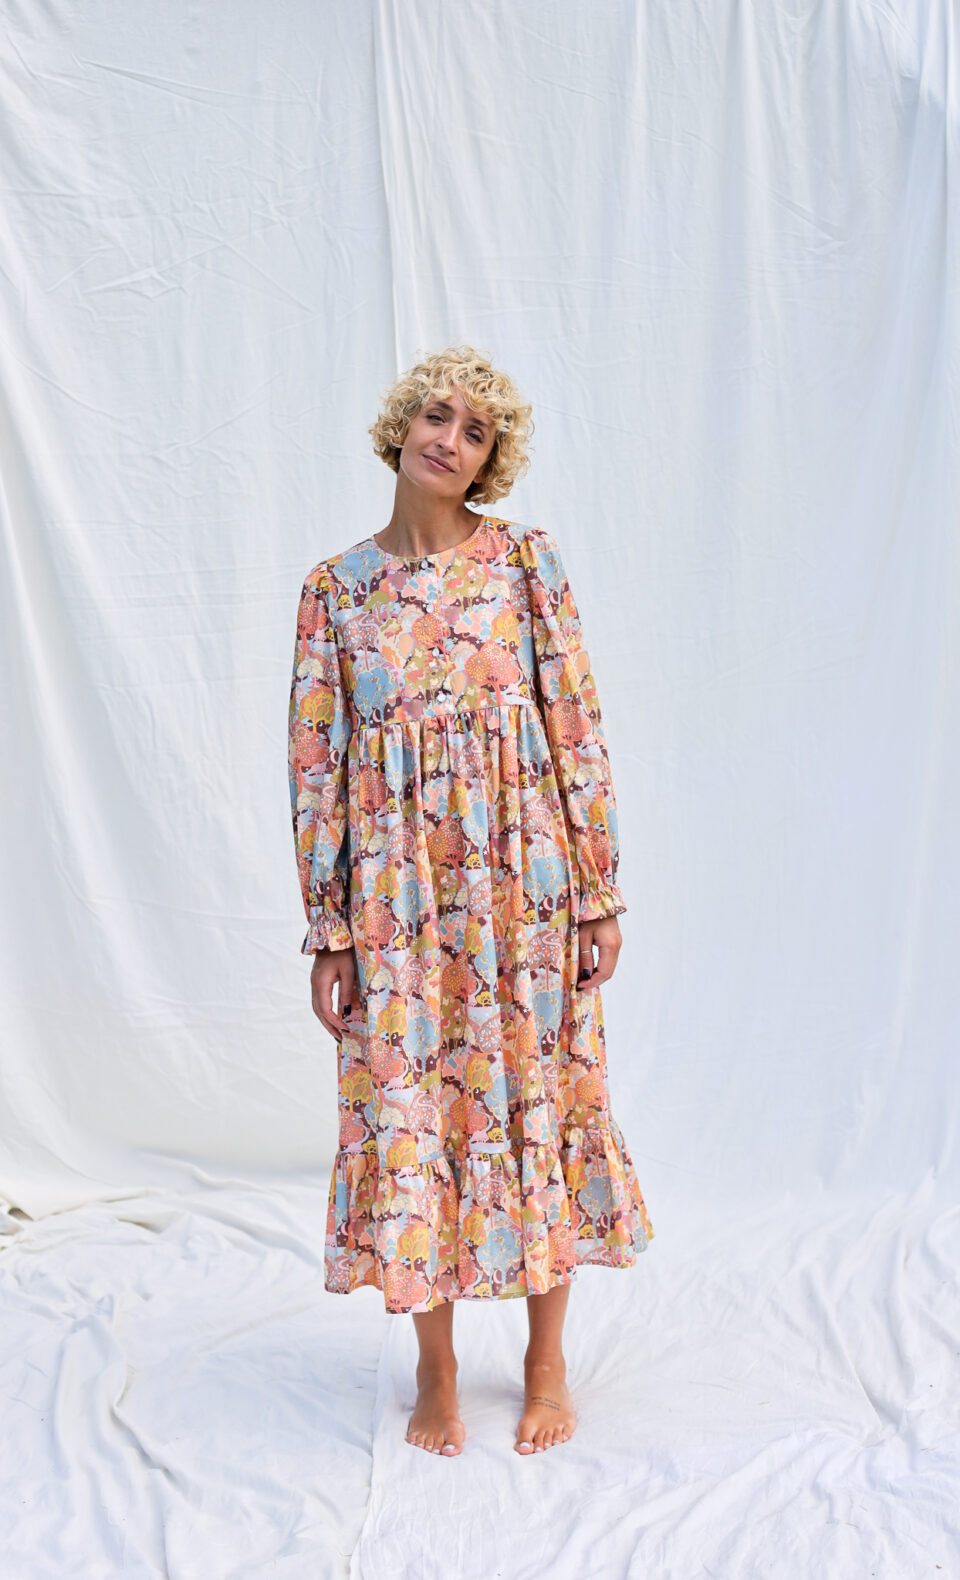 Floral dress | Dress | Sustainable clothing | OffOn clothing